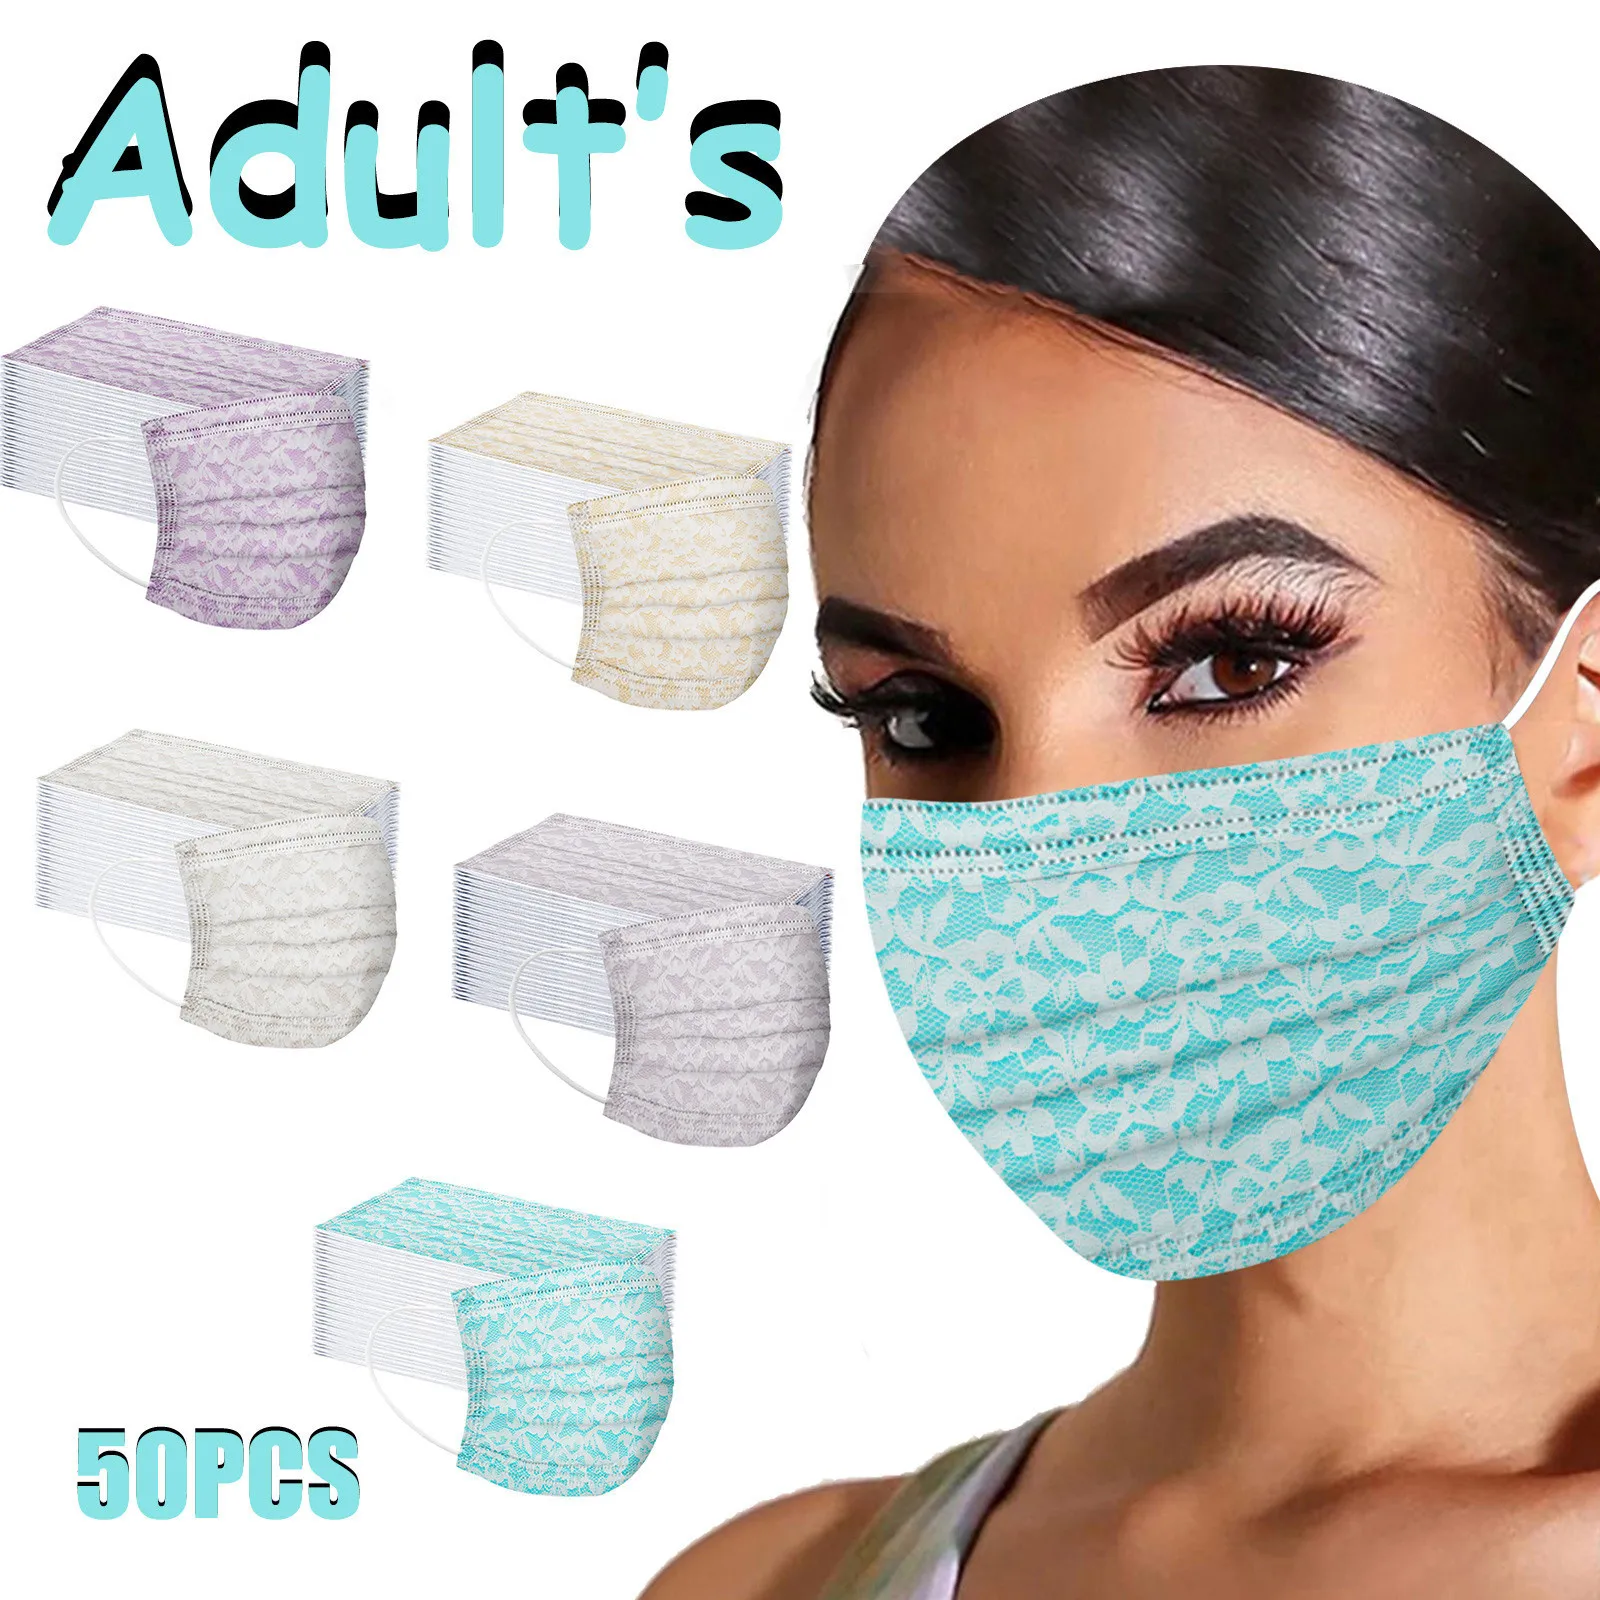 50pcs Floral Print Adults Masks Disposable Face Masks 3ply Loop Meltblown Non-woven Mouth Maks Halloween Cosplay Decor Props witch halloween costume